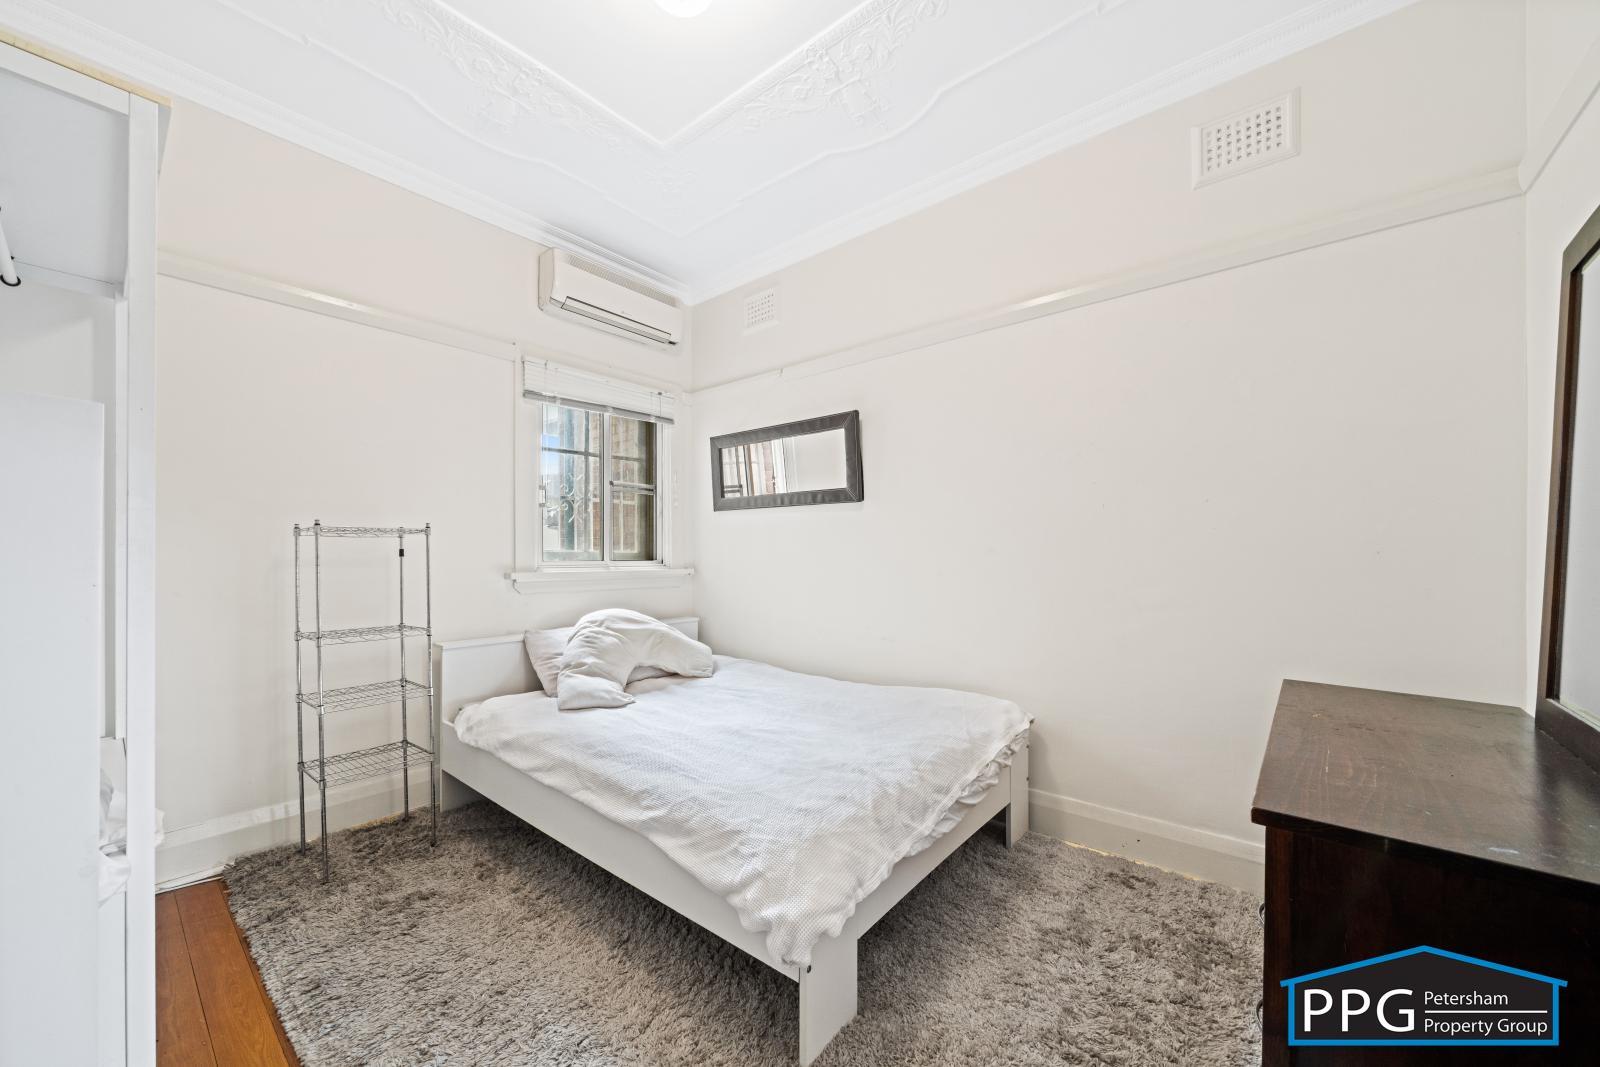 Selling your property in Petersham